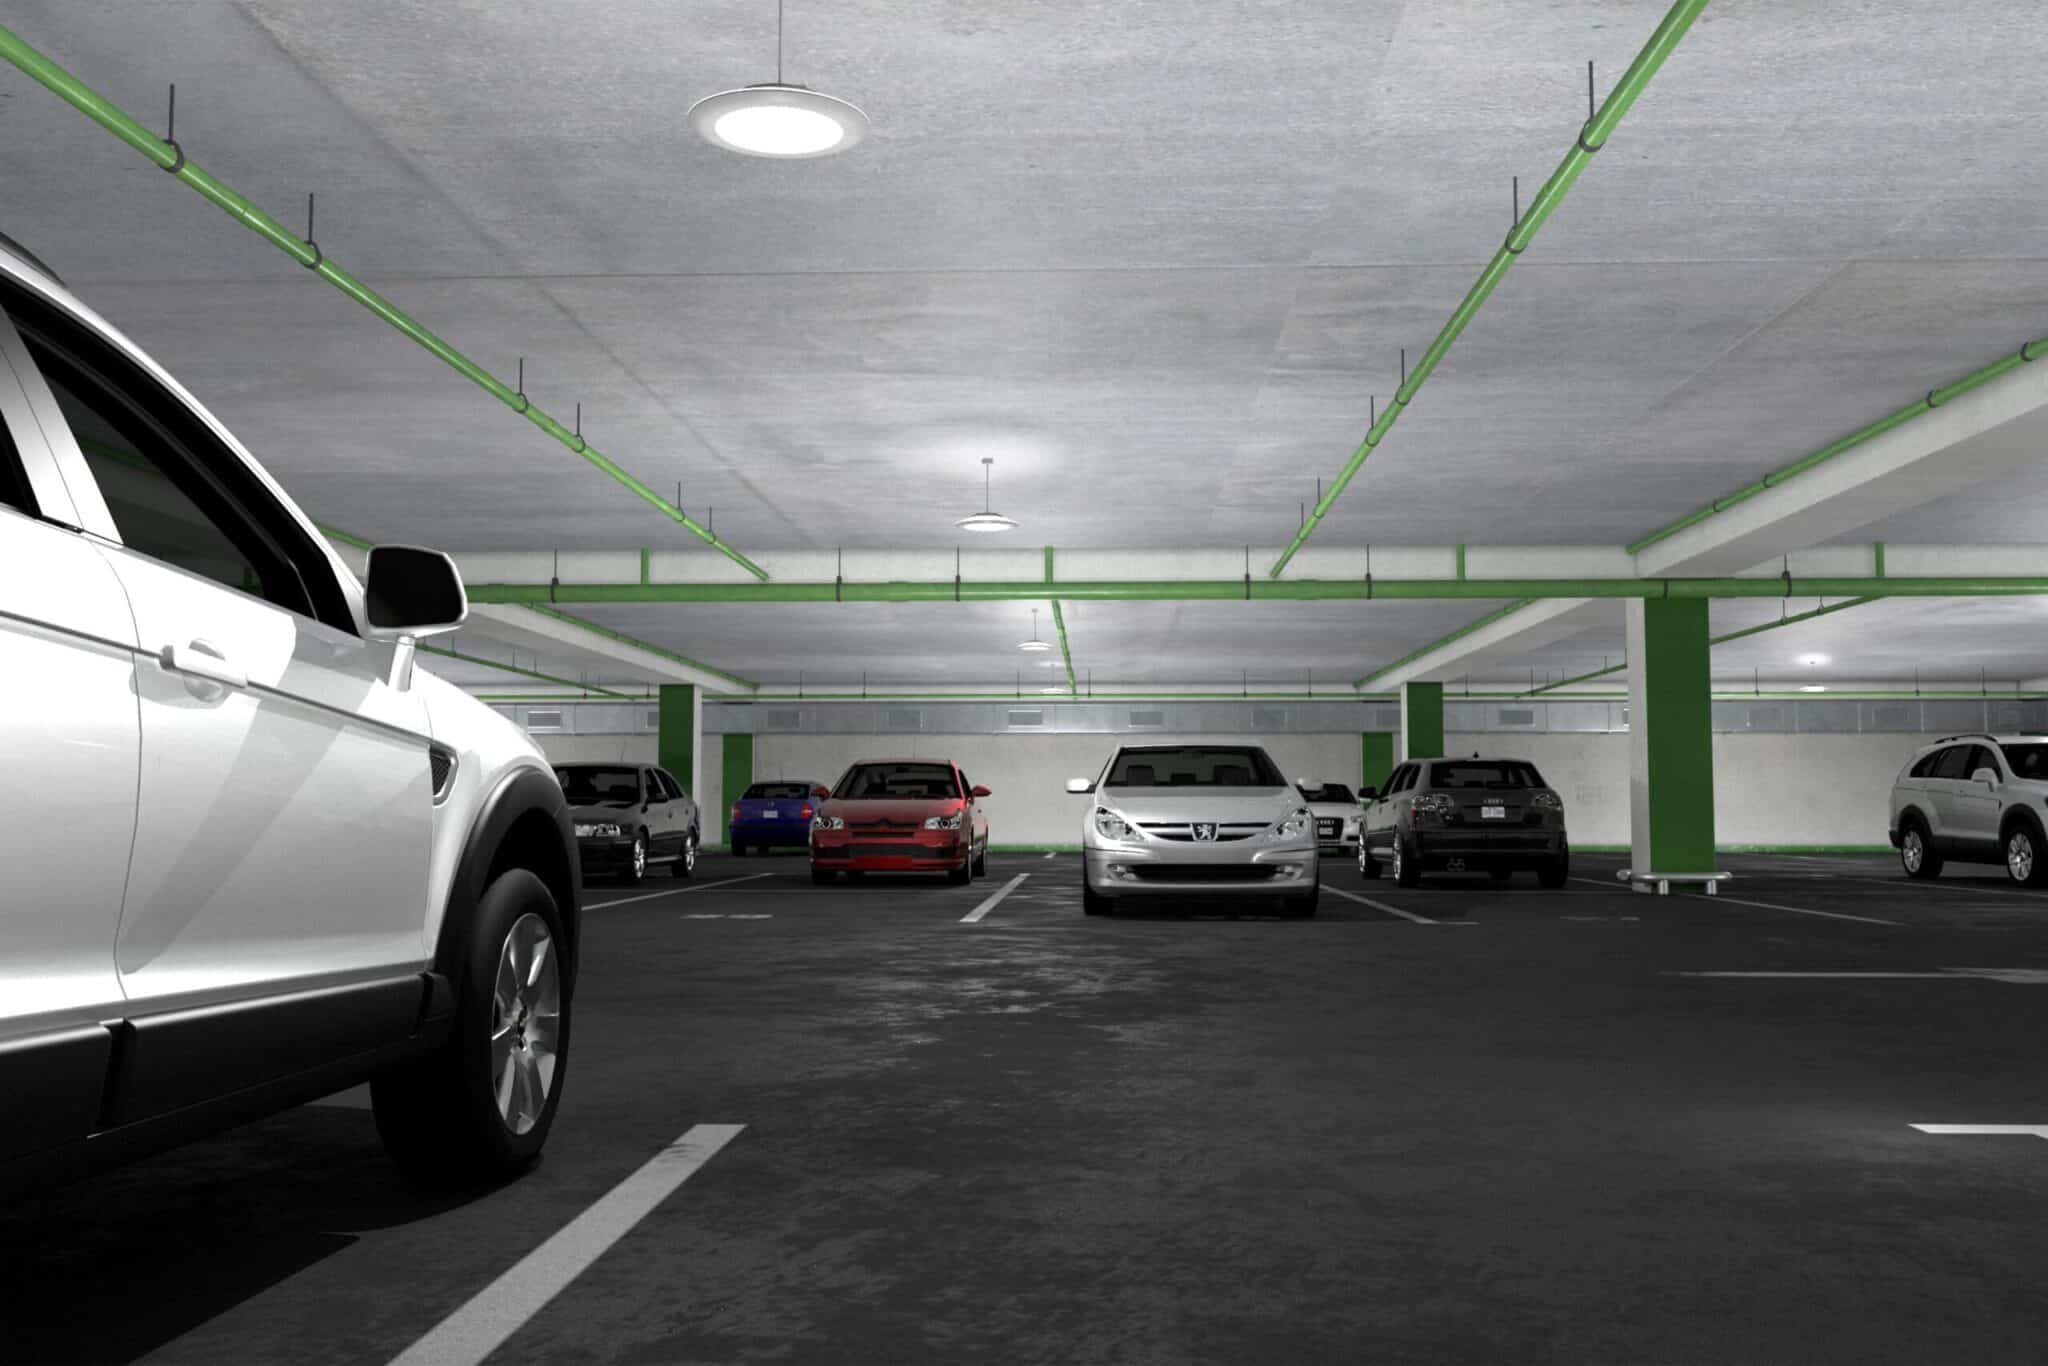 A white car is parked in a parking garage illuminated with upgraded lighting from Illuminating Ideas.